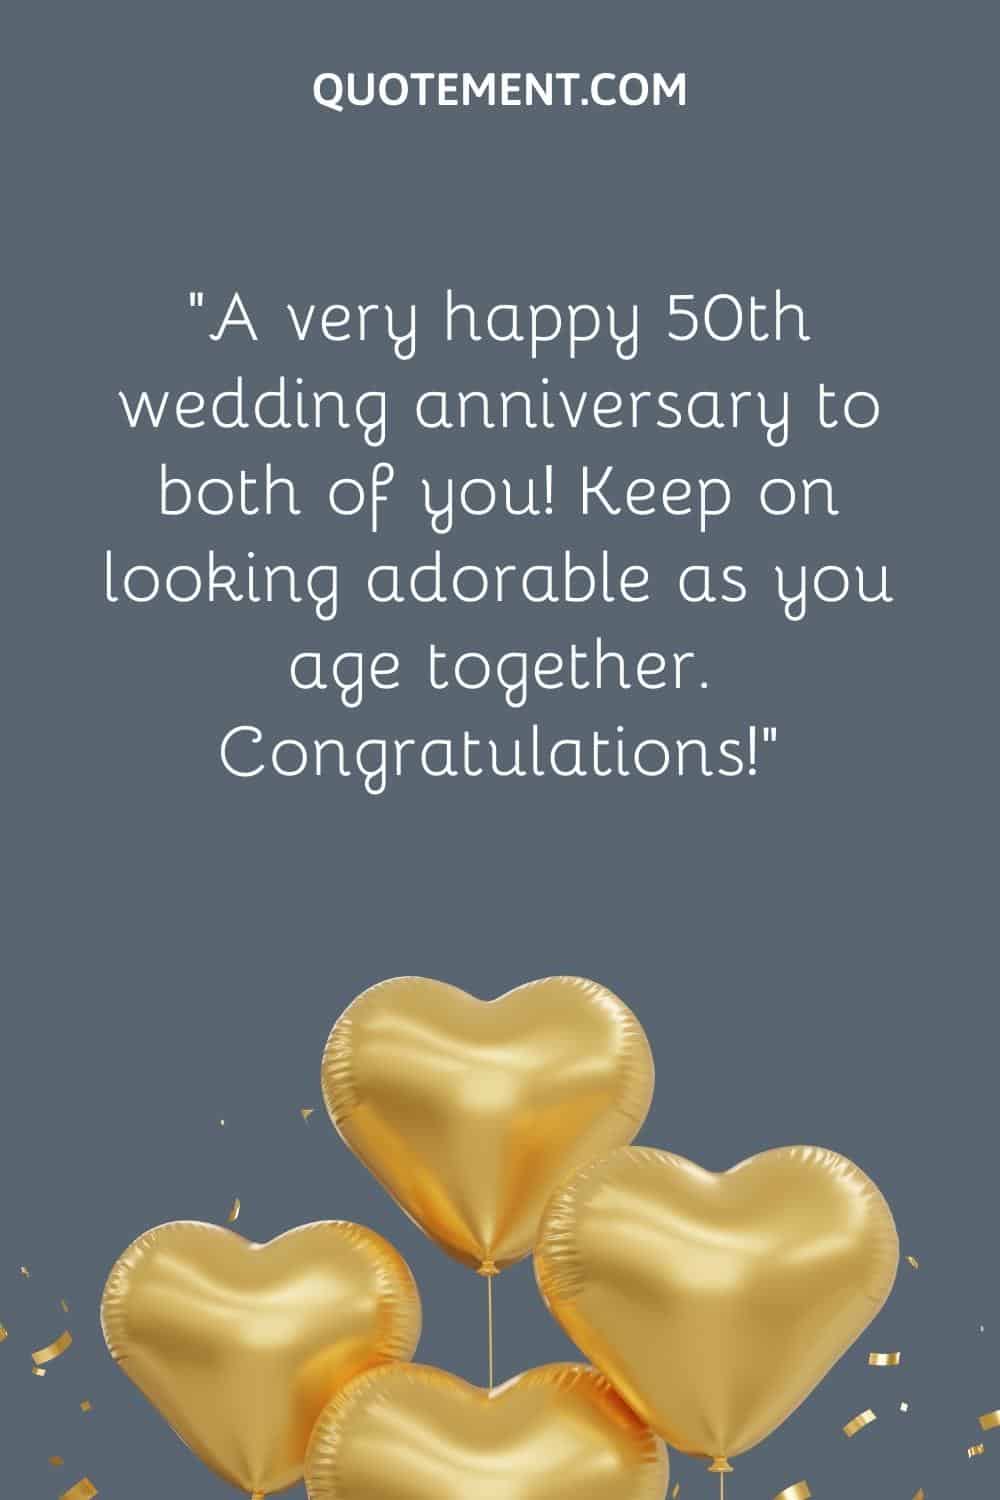 “A very happy 50th wedding anniversary to both of you! Keep on looking adorable as you age together. Congratulations!”